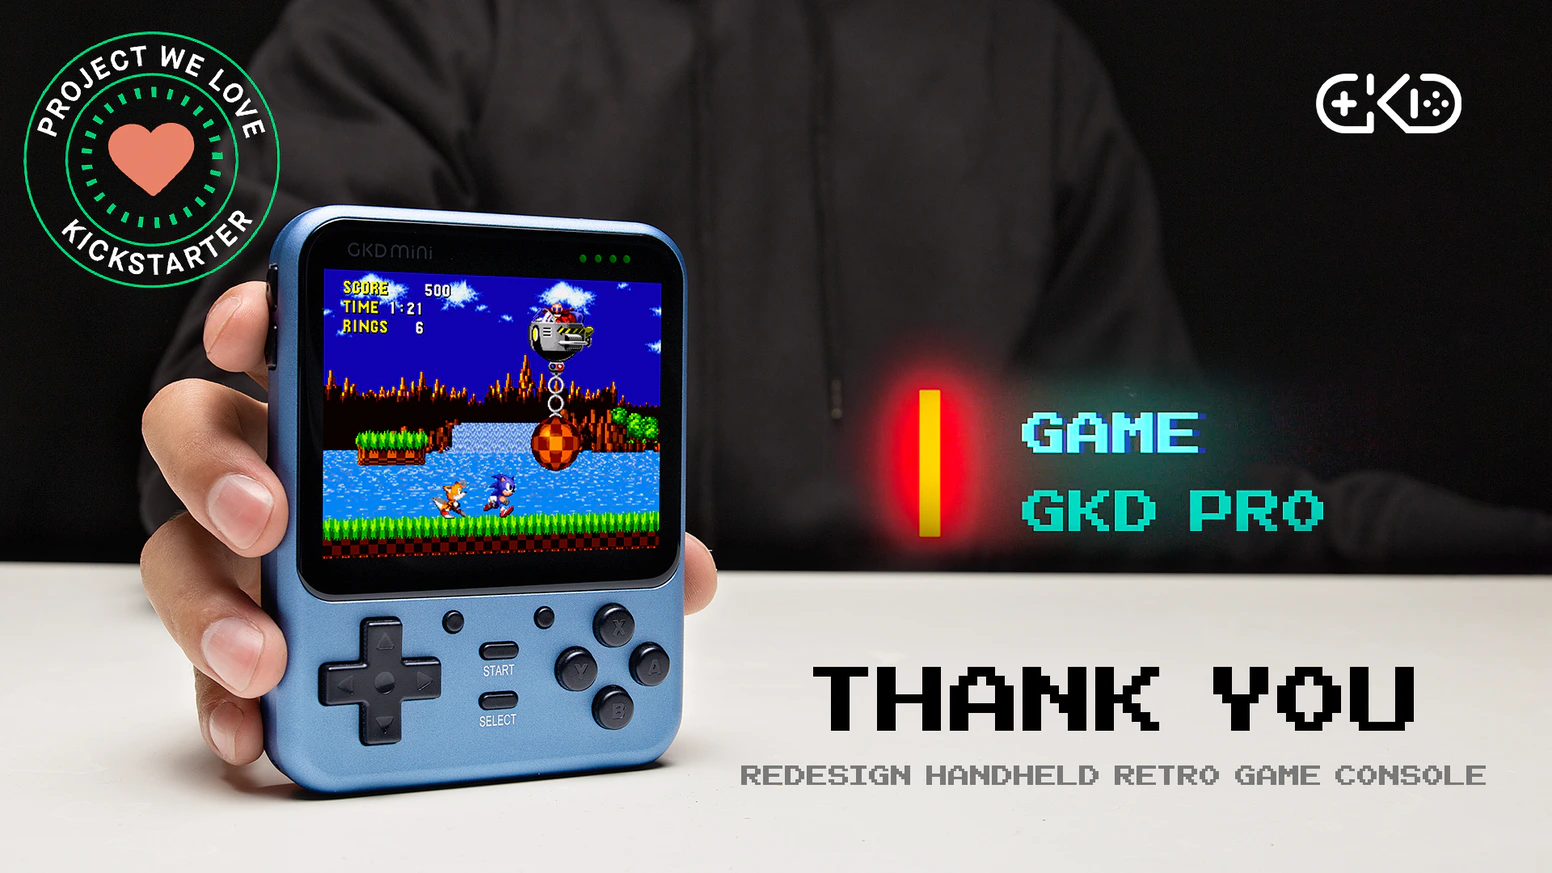 GKD Pro handheld game console with built-in games